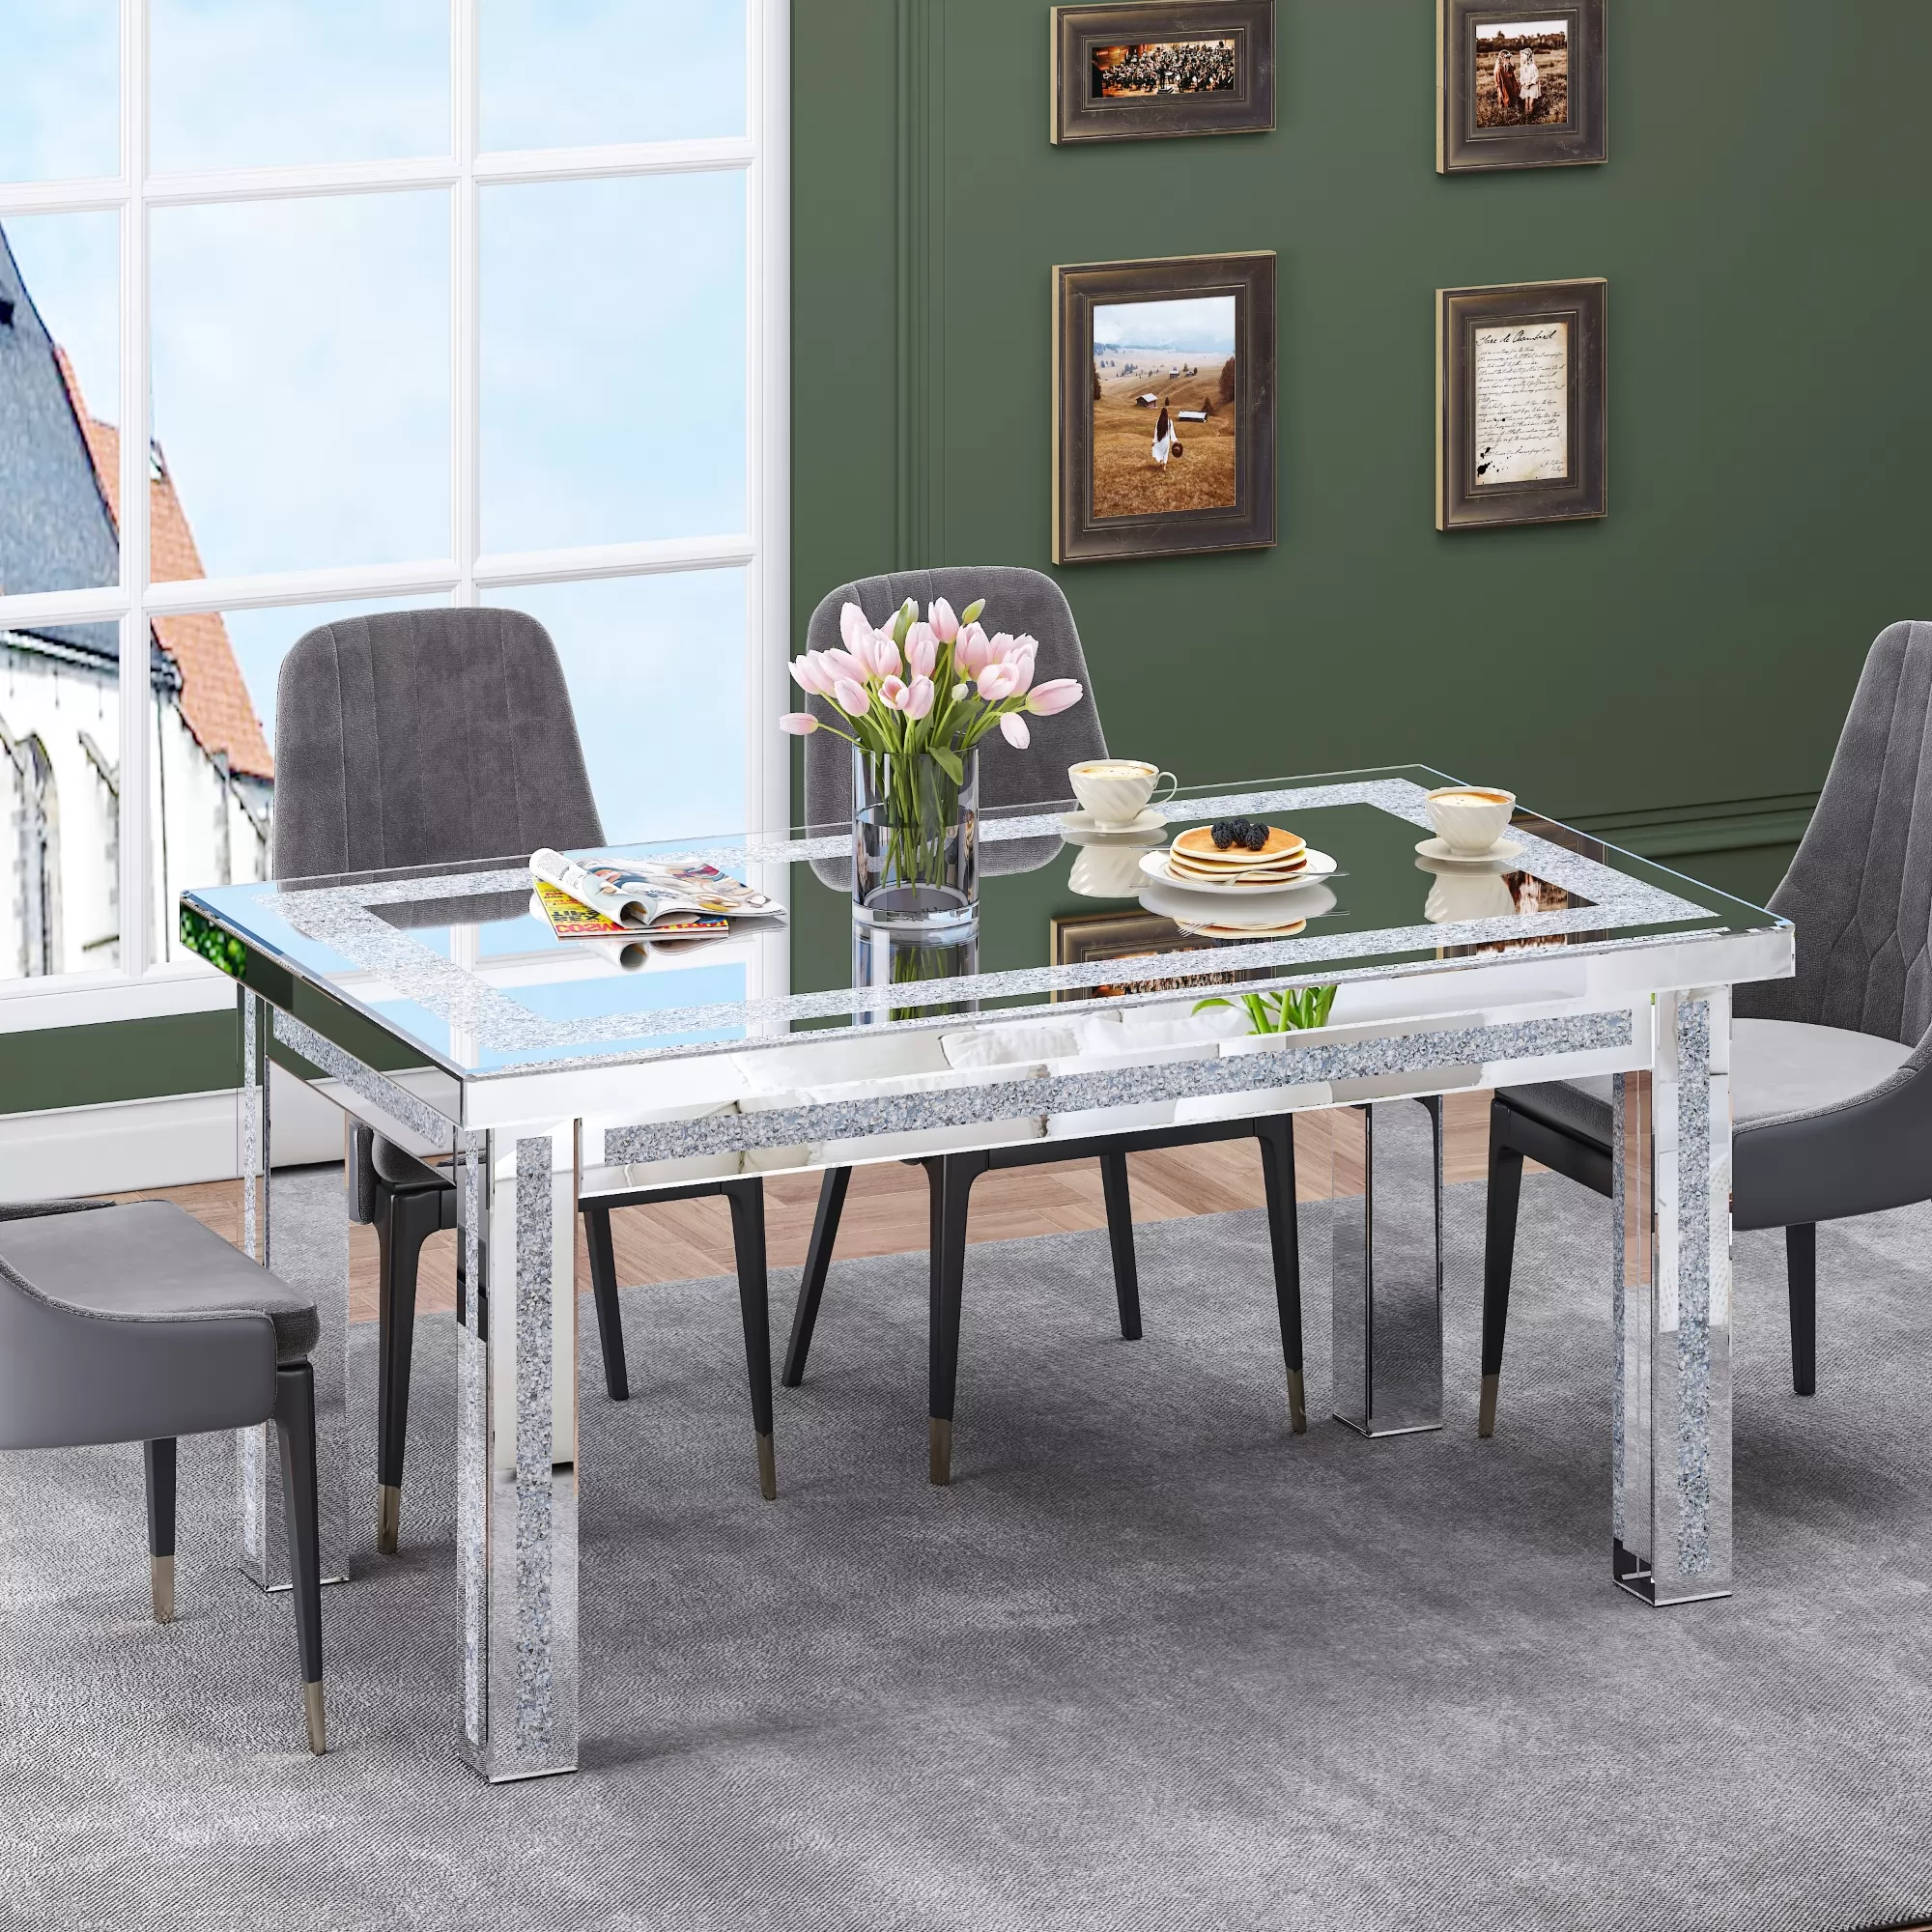 Dunlavy 63" Rectangle Mirror Glass Dining Table with 4 Legs